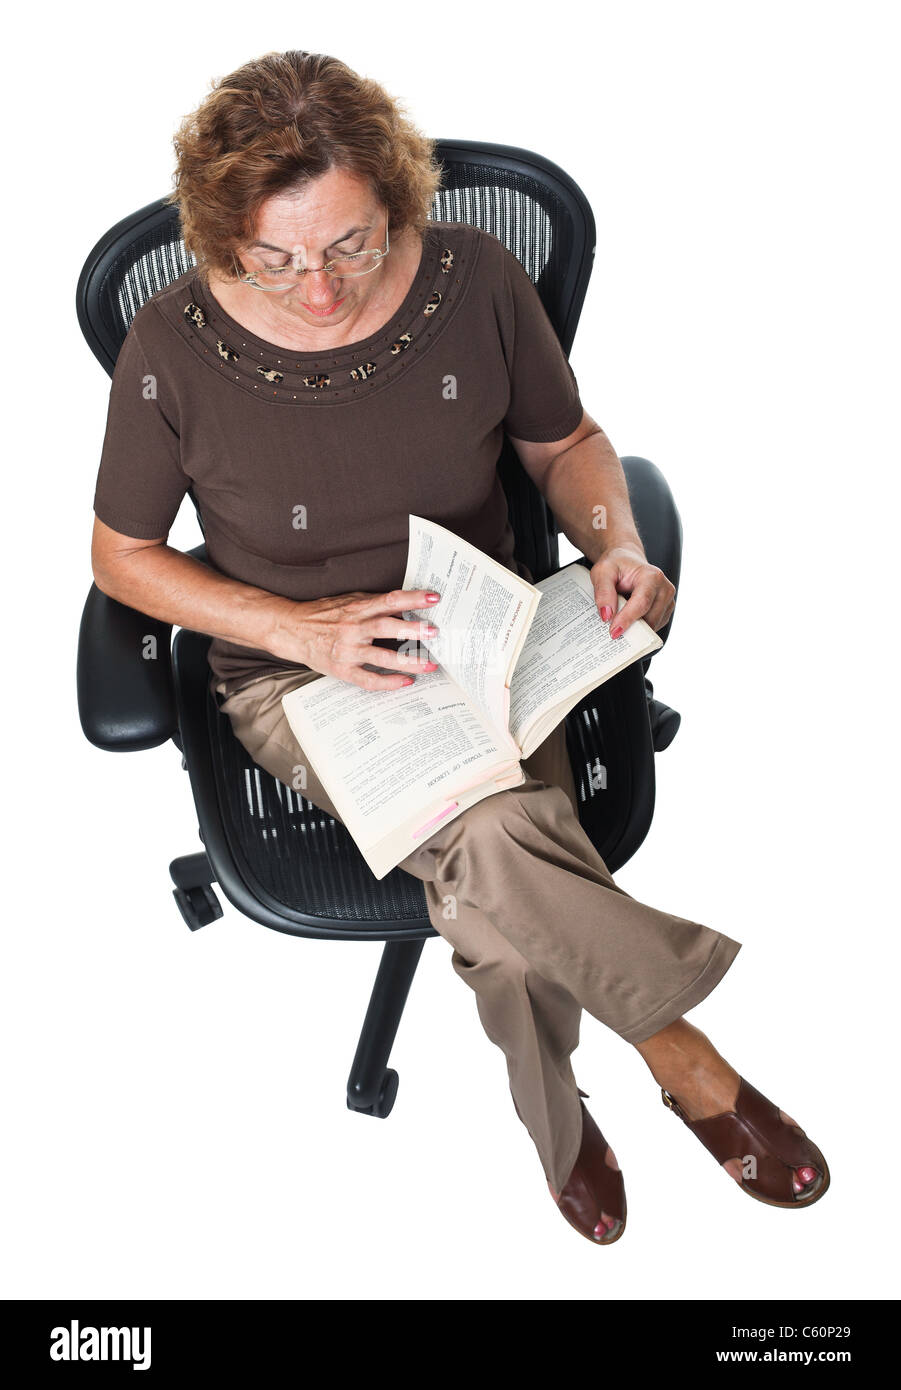 woman reading a book on modern chair Stock Photo